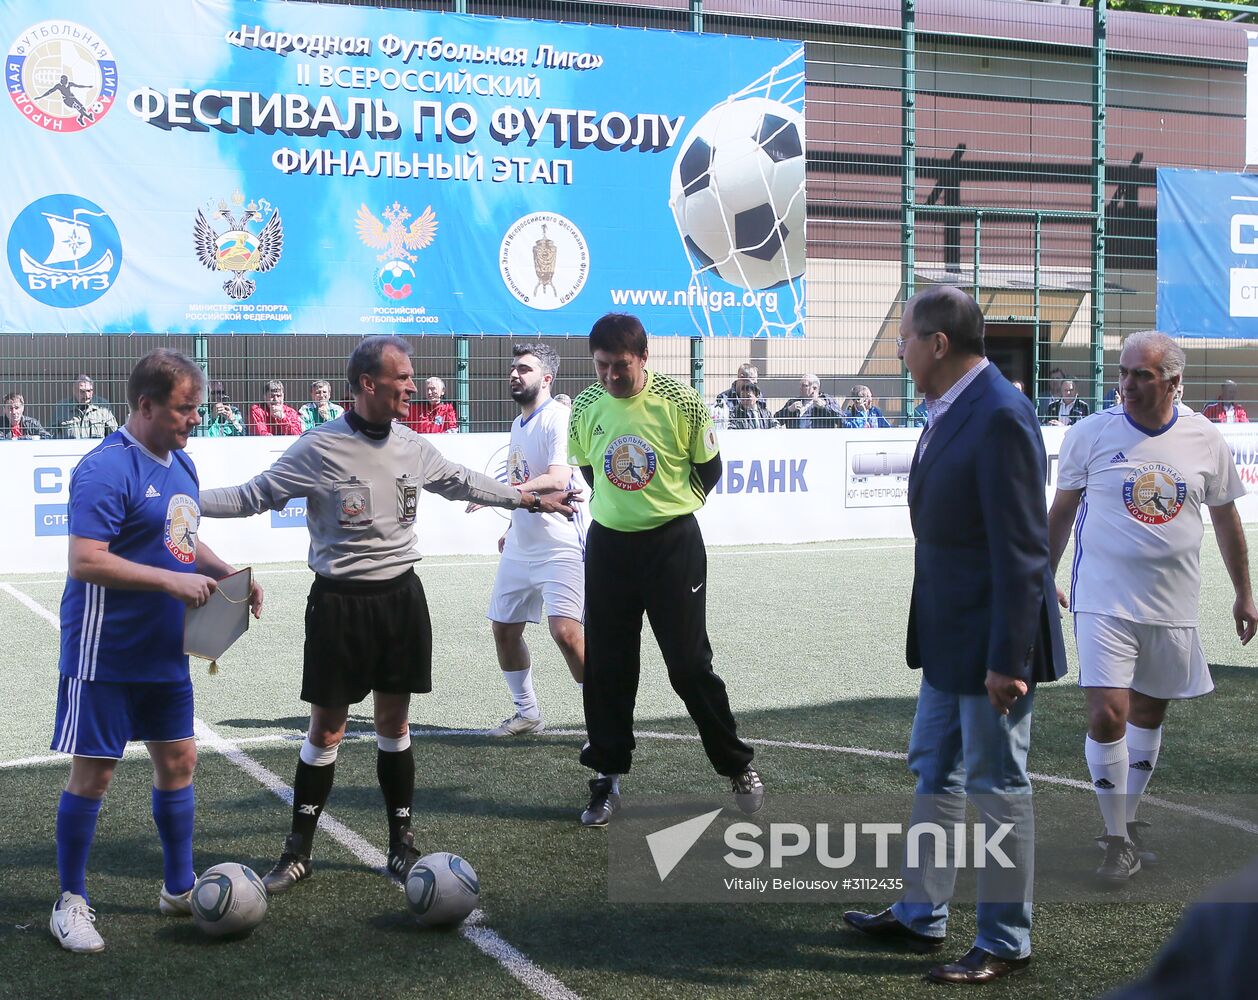 Final stage of People's Football League's 2nd football festival